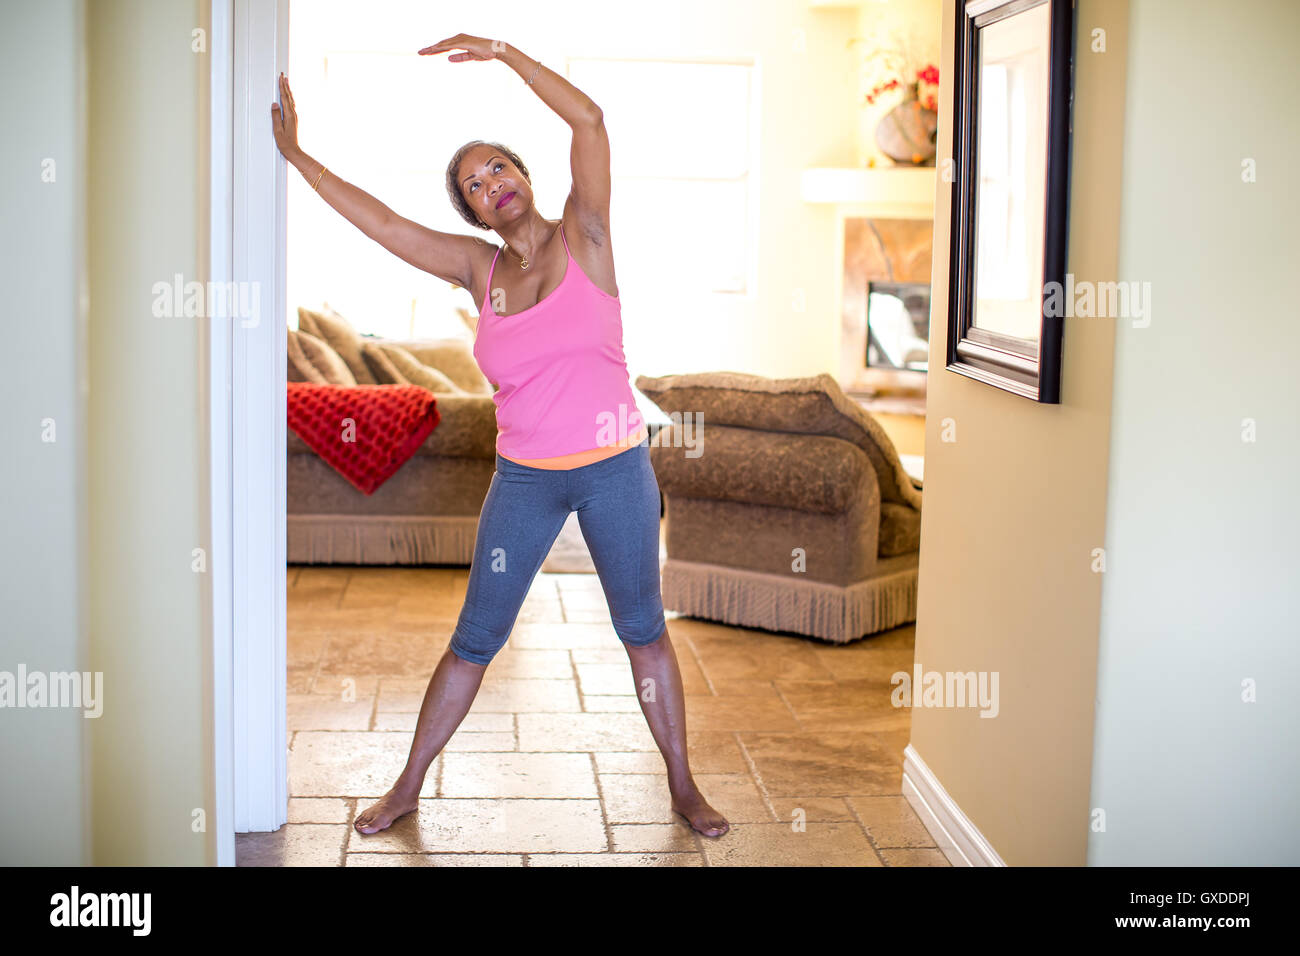 Woman with arms raised doing stretching exercise Stock Photo